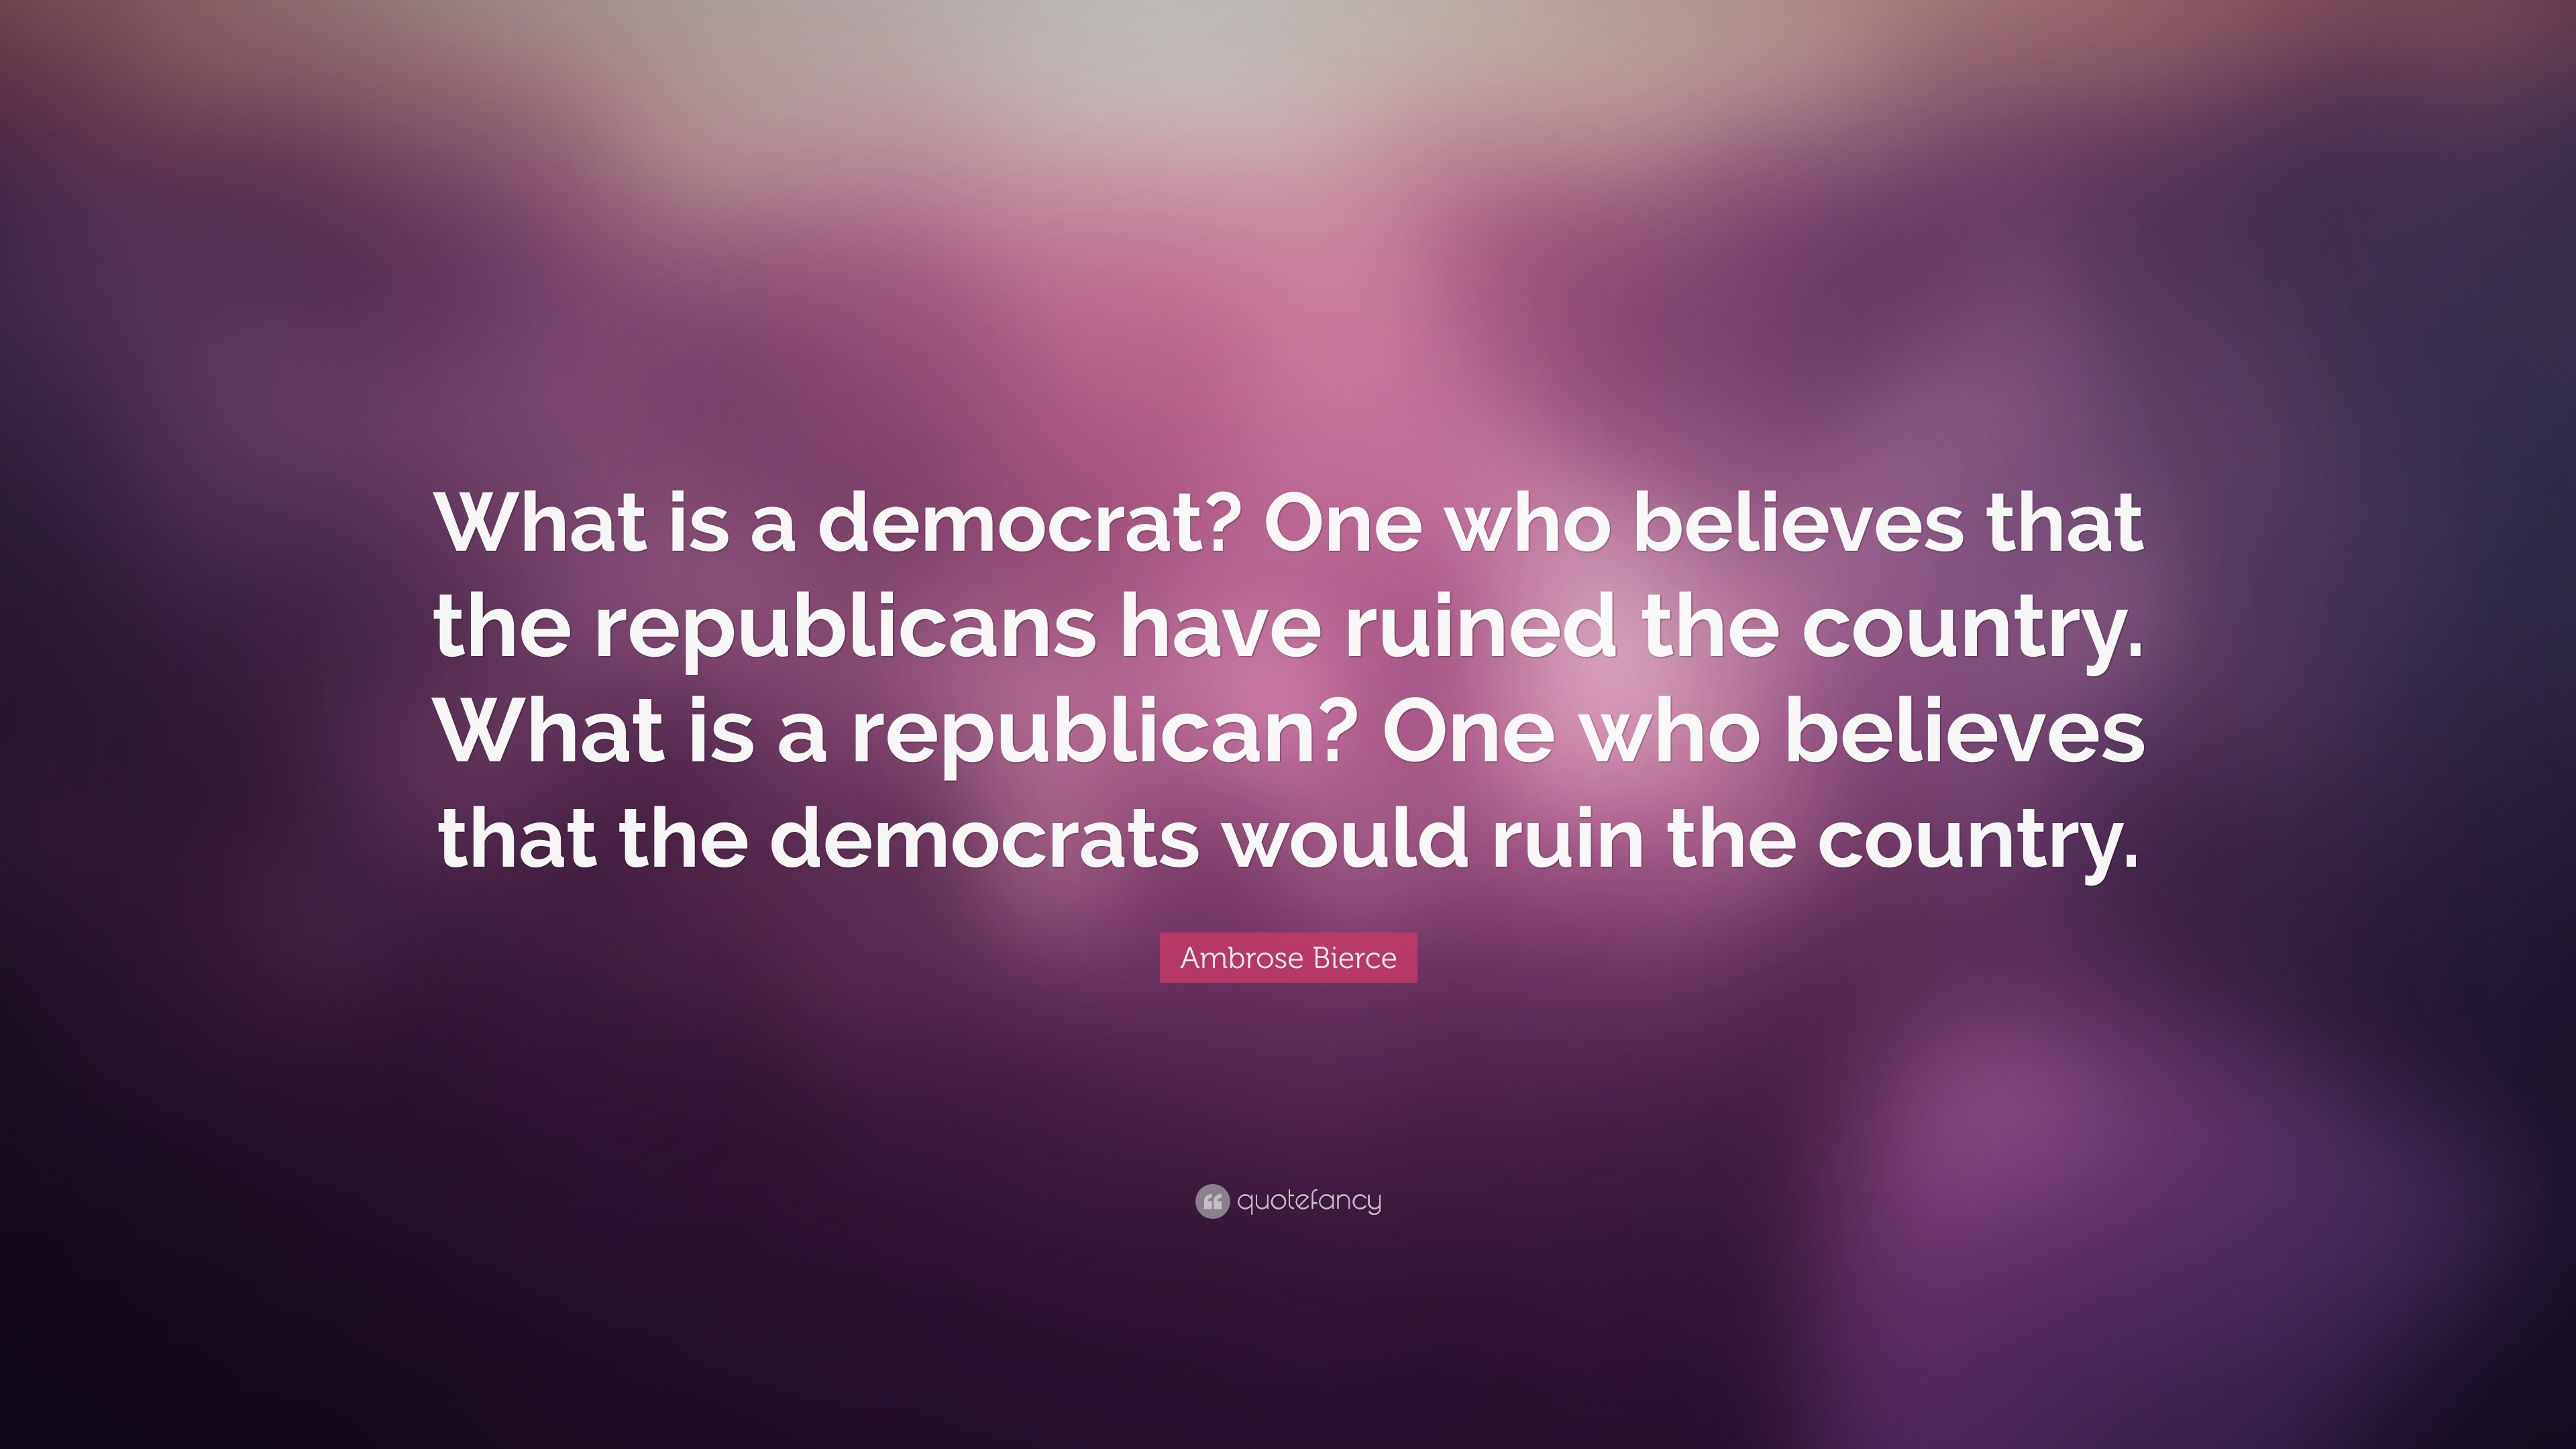 3840x2160 5 wallpapers. Ambrose Bierce Quote: “What is a democrat? One who believes  that the republicans